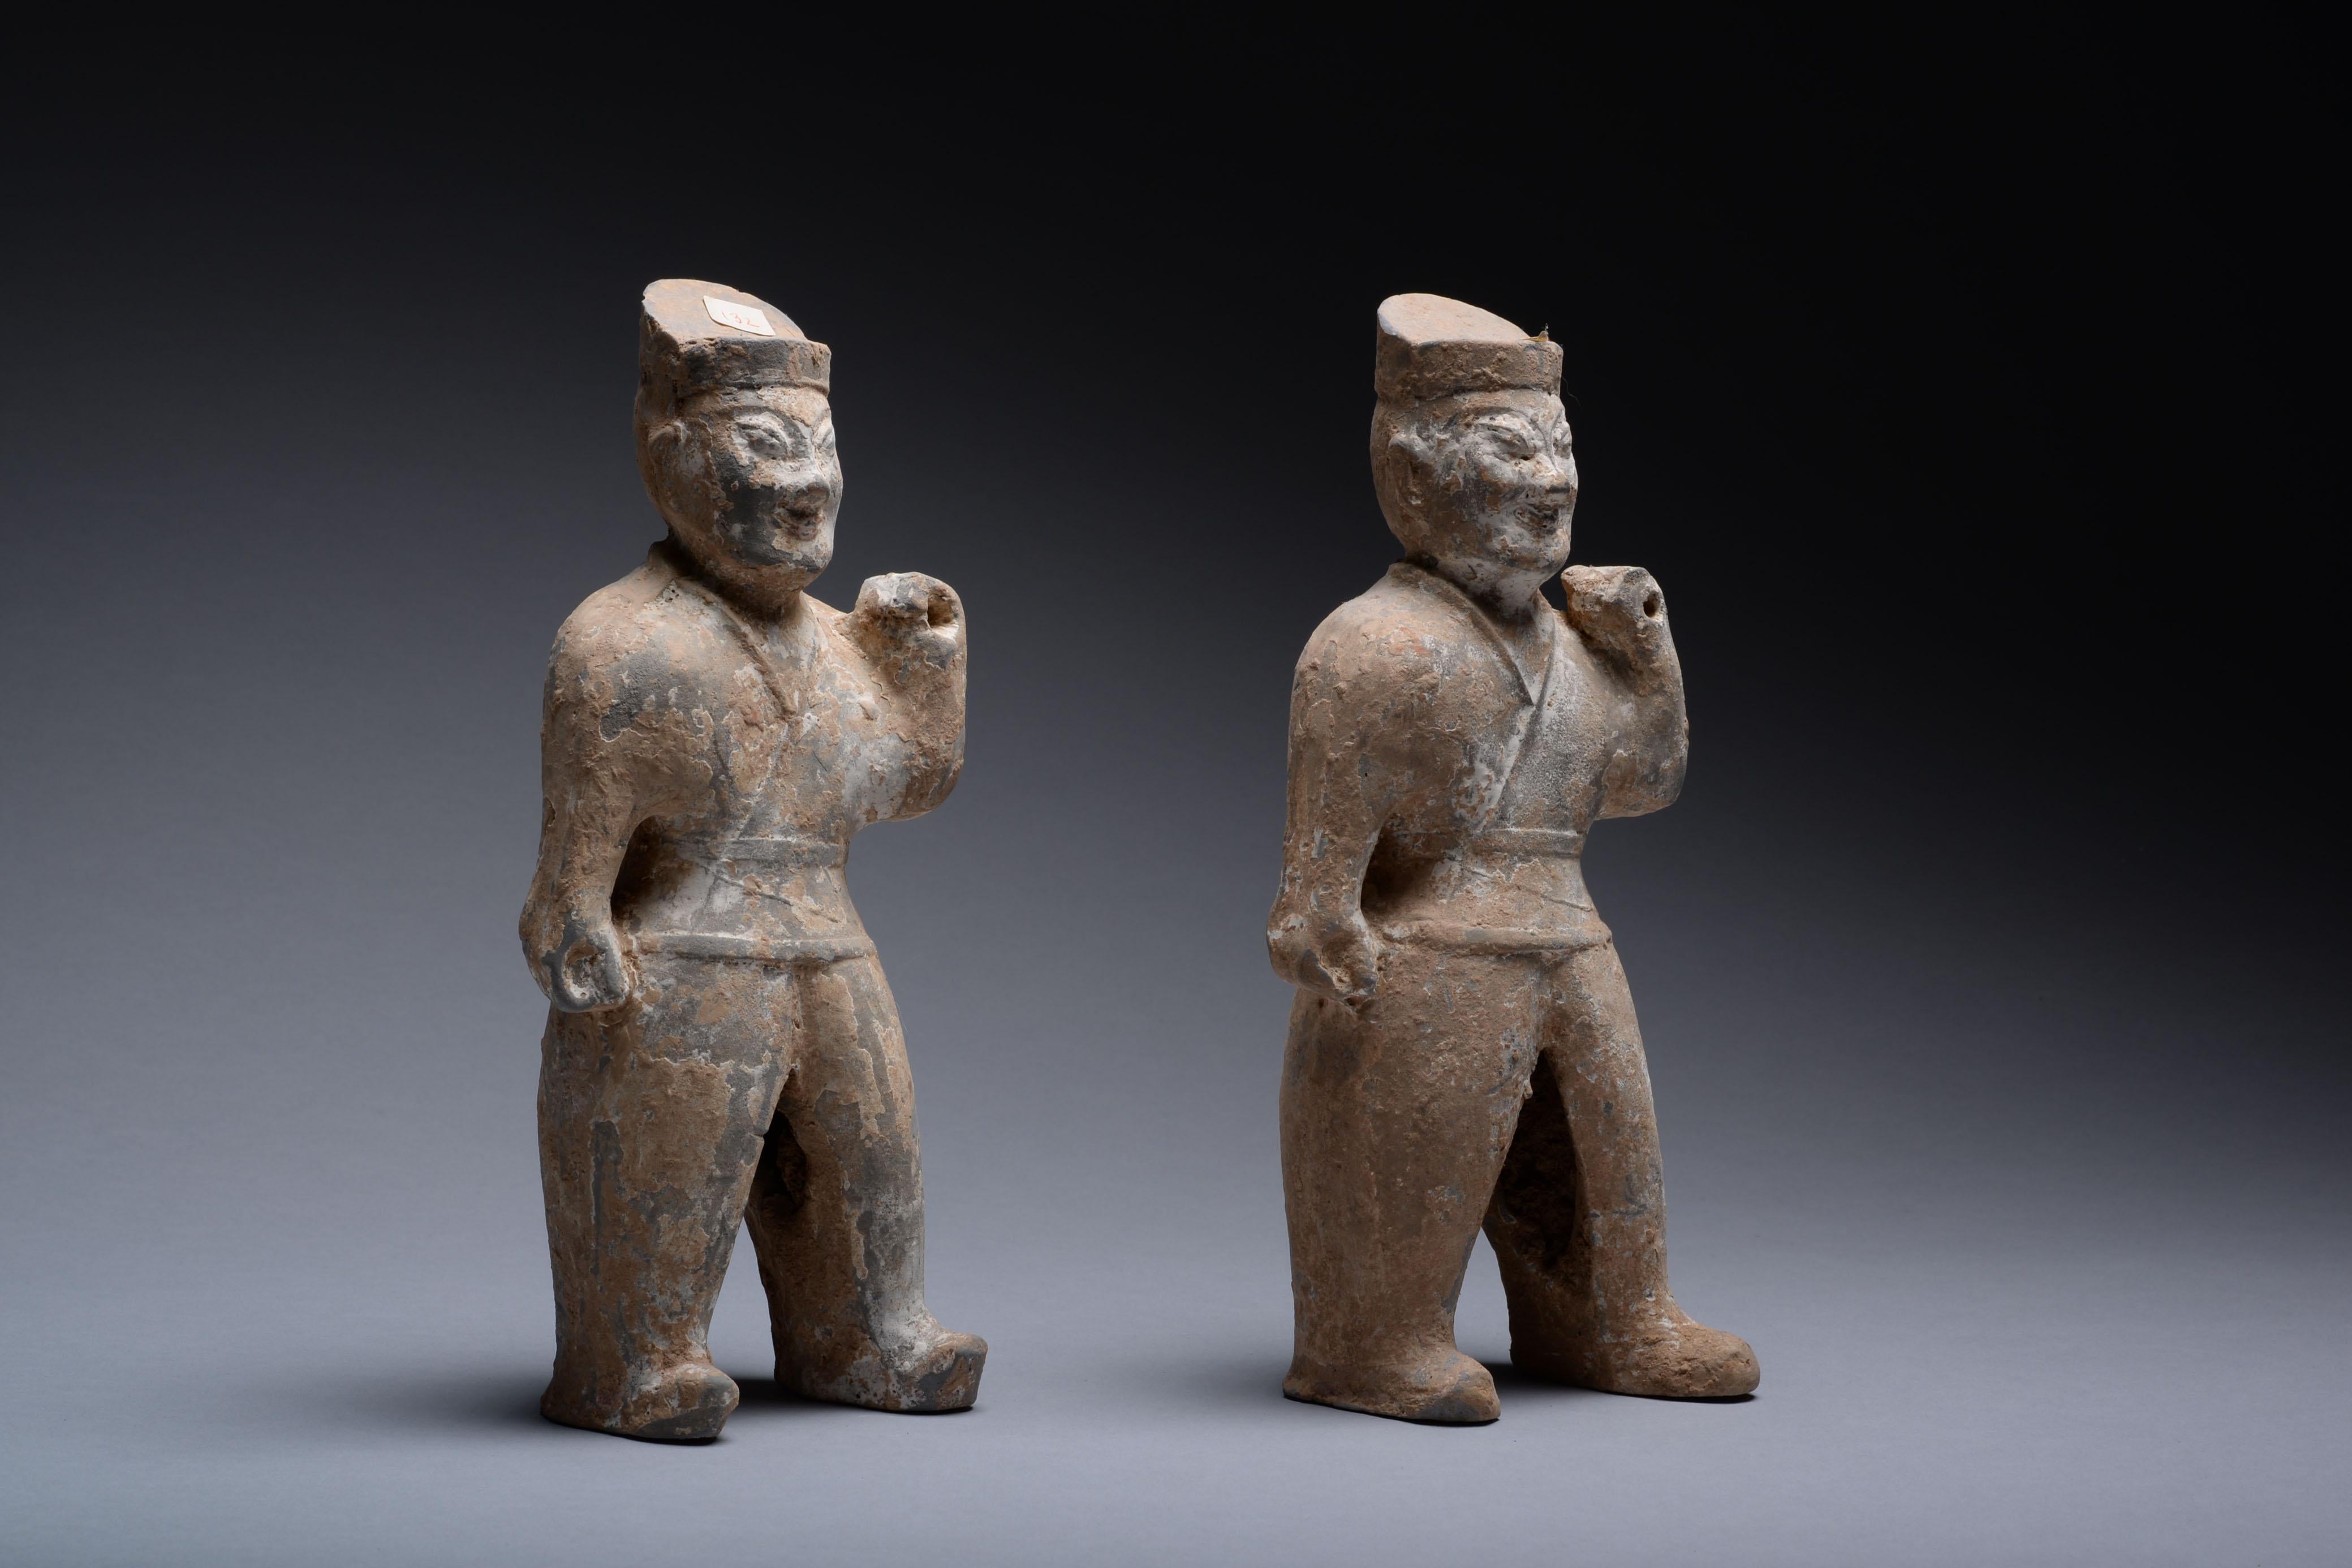 A pair of ancient Chinese terracotta warriors, dating to the Western Jin dynasty, 265-316 AD.

The figures stand defiantly, their right arms by their sides, their left raised and pierced, likely to hold a wooden spear in antiquity. Both figures